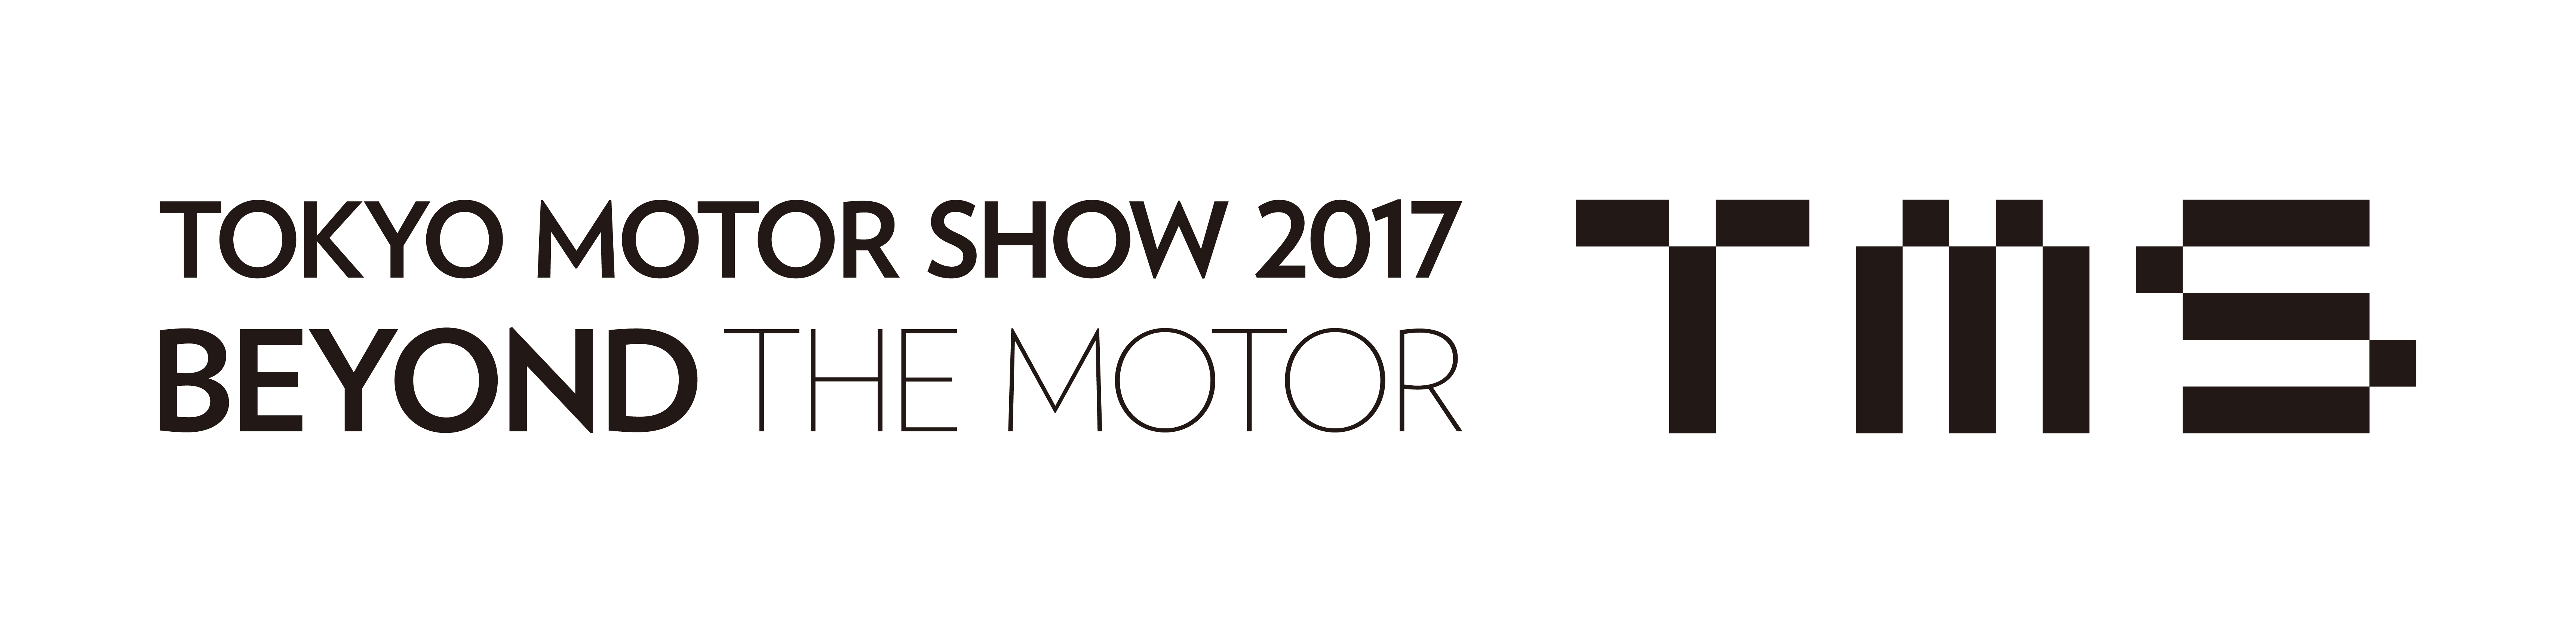 The 45th Tokyo Motor Show 17 To Showcase The Future Of Mobility With Cutting Edge Innovation The Culmination Of Automotive Technology And More Business Wire